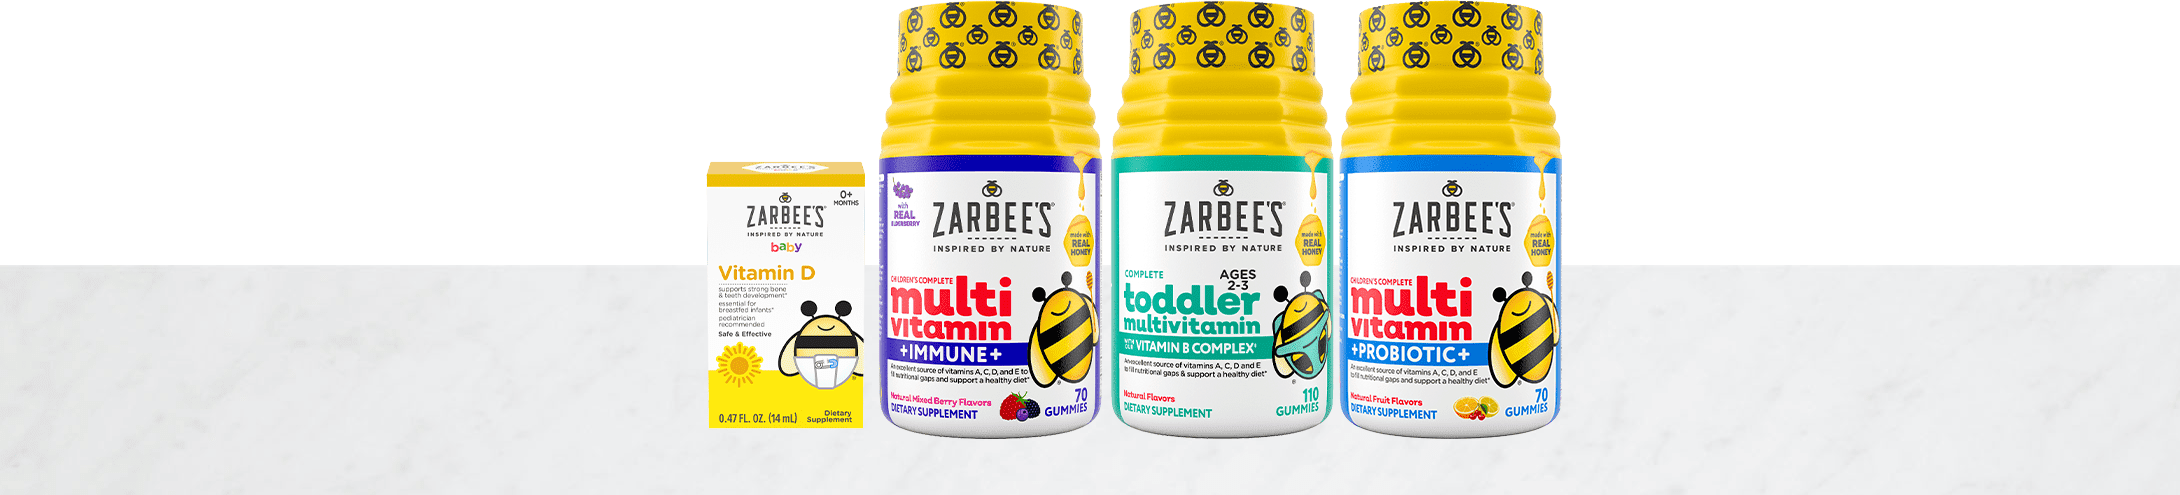 Zarbee’s nutritional support product packages